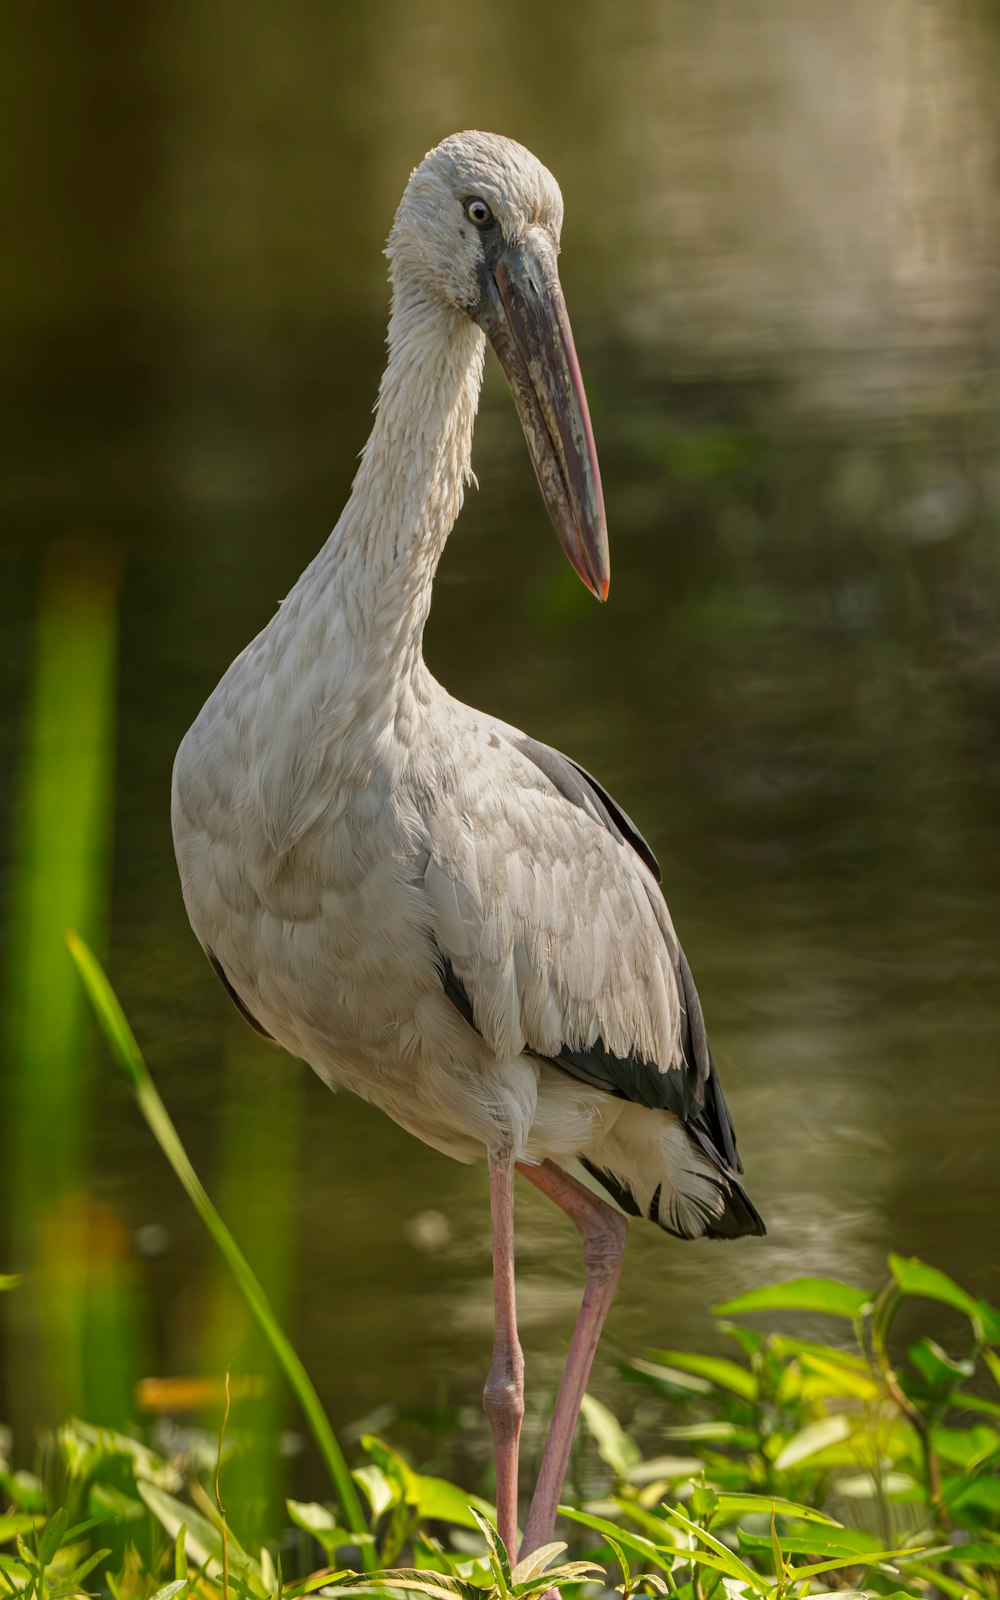 a white bird with a long neck standing in the grass